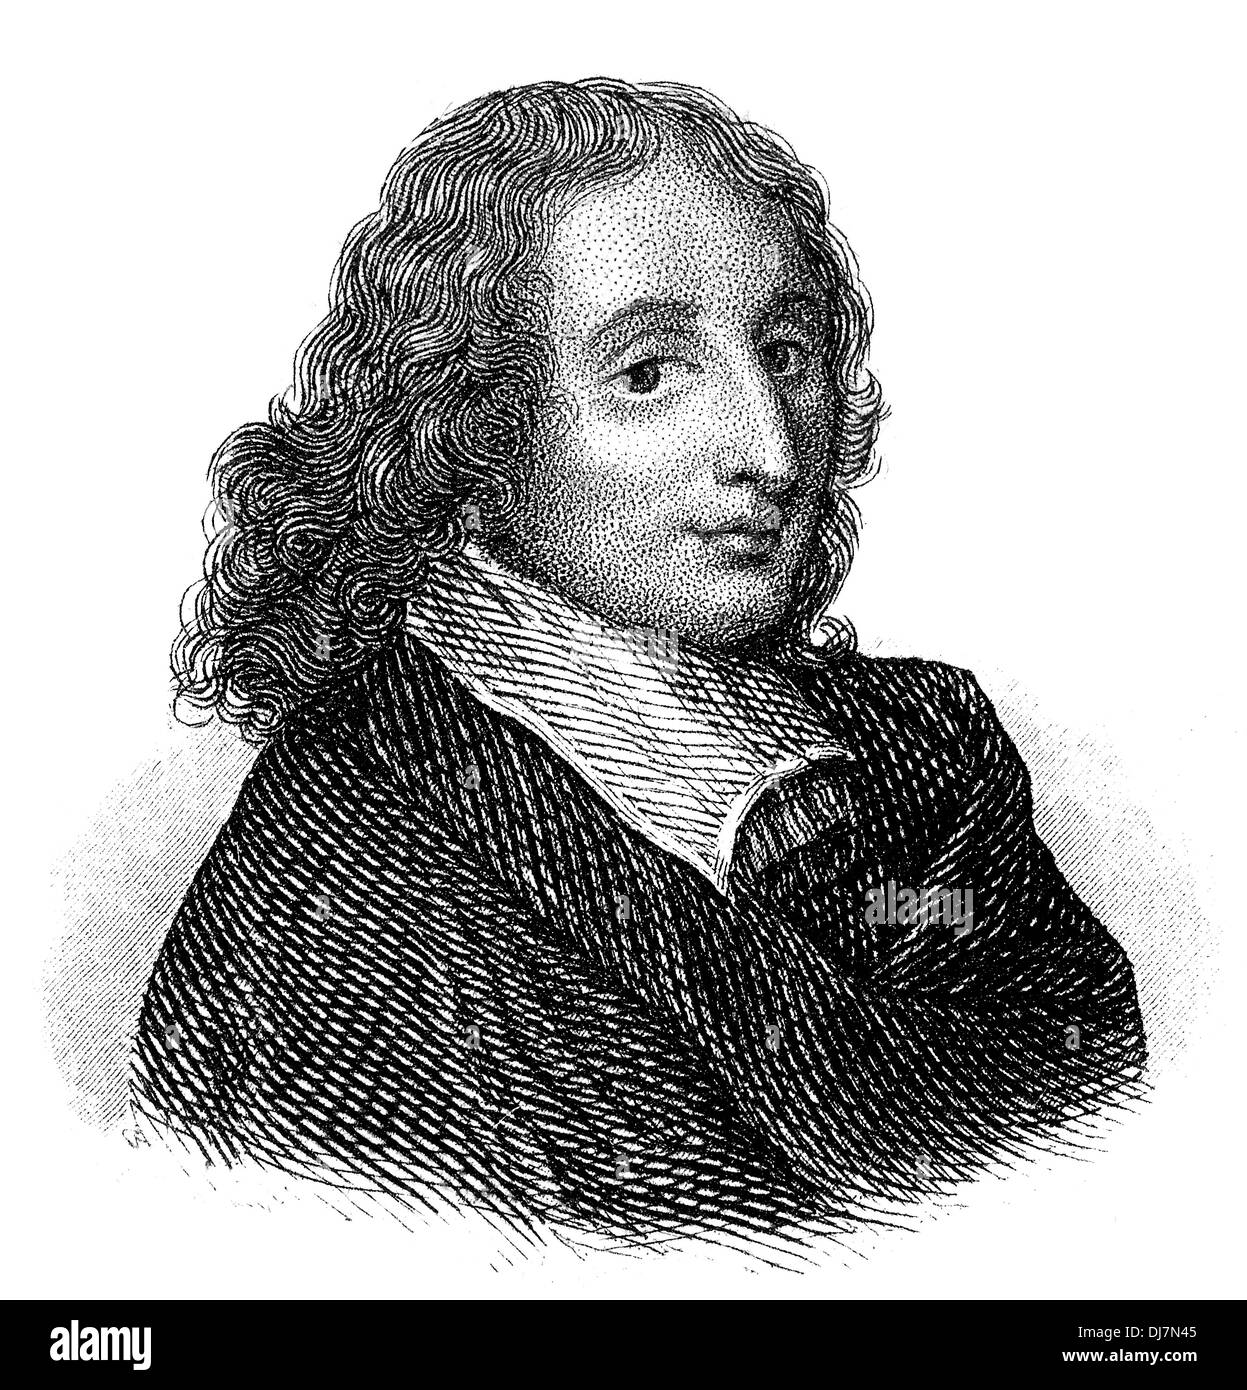 Portrait of Blaise Pascal, 1623 - 1662, a French mathematician, physicist, philosopher, writer and Catholic philosopher, Stock Photo